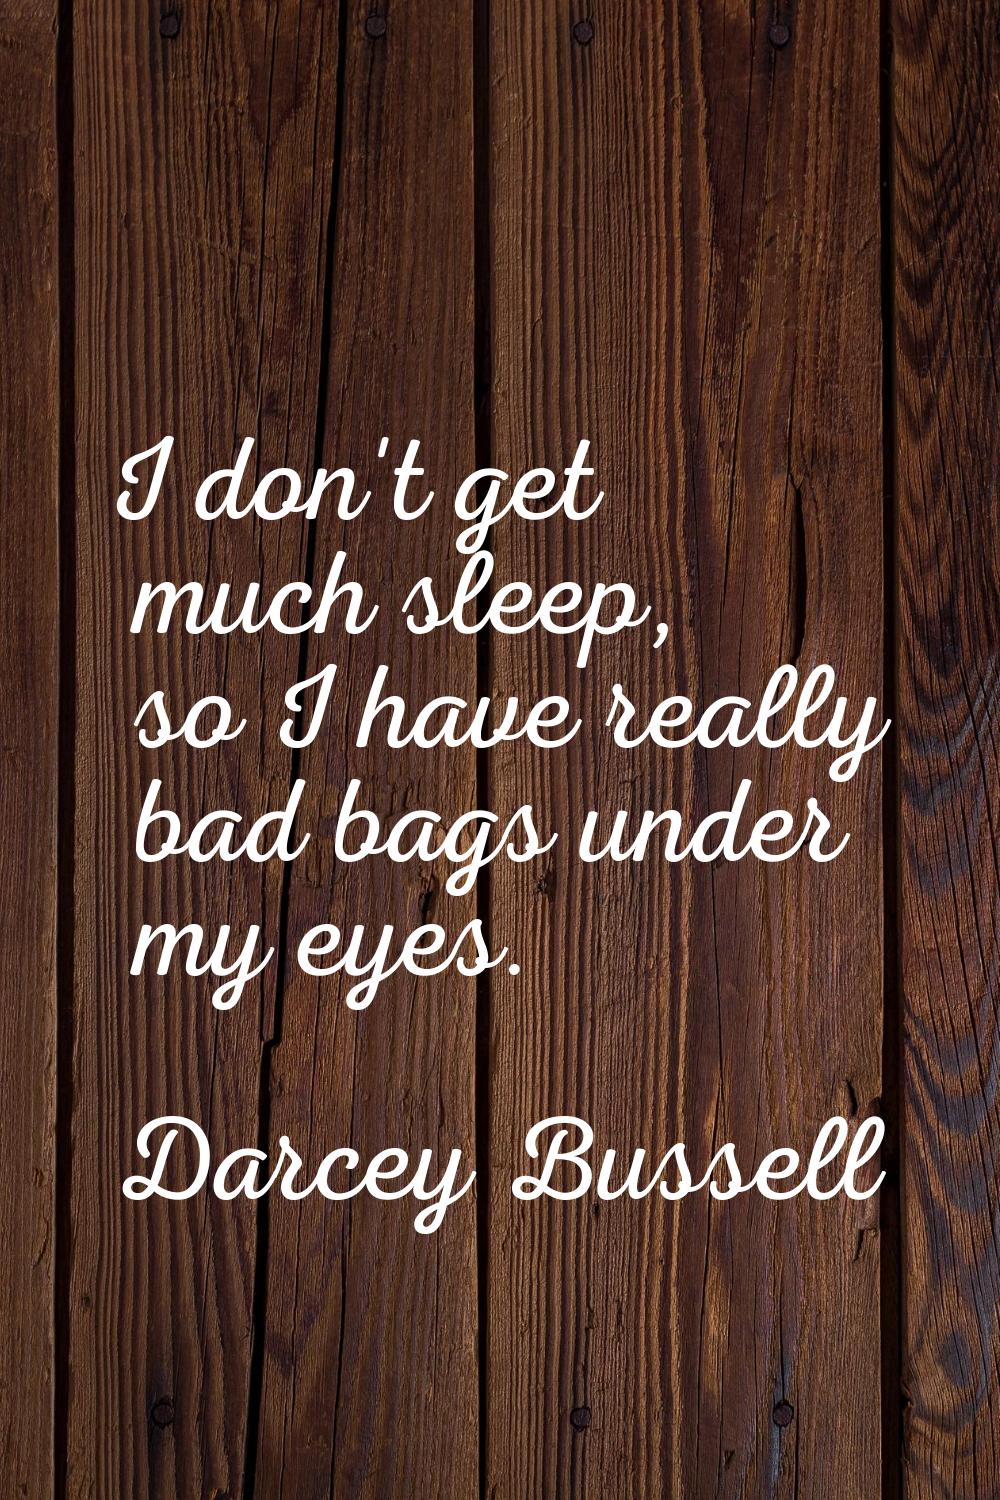 I don't get much sleep, so I have really bad bags under my eyes.